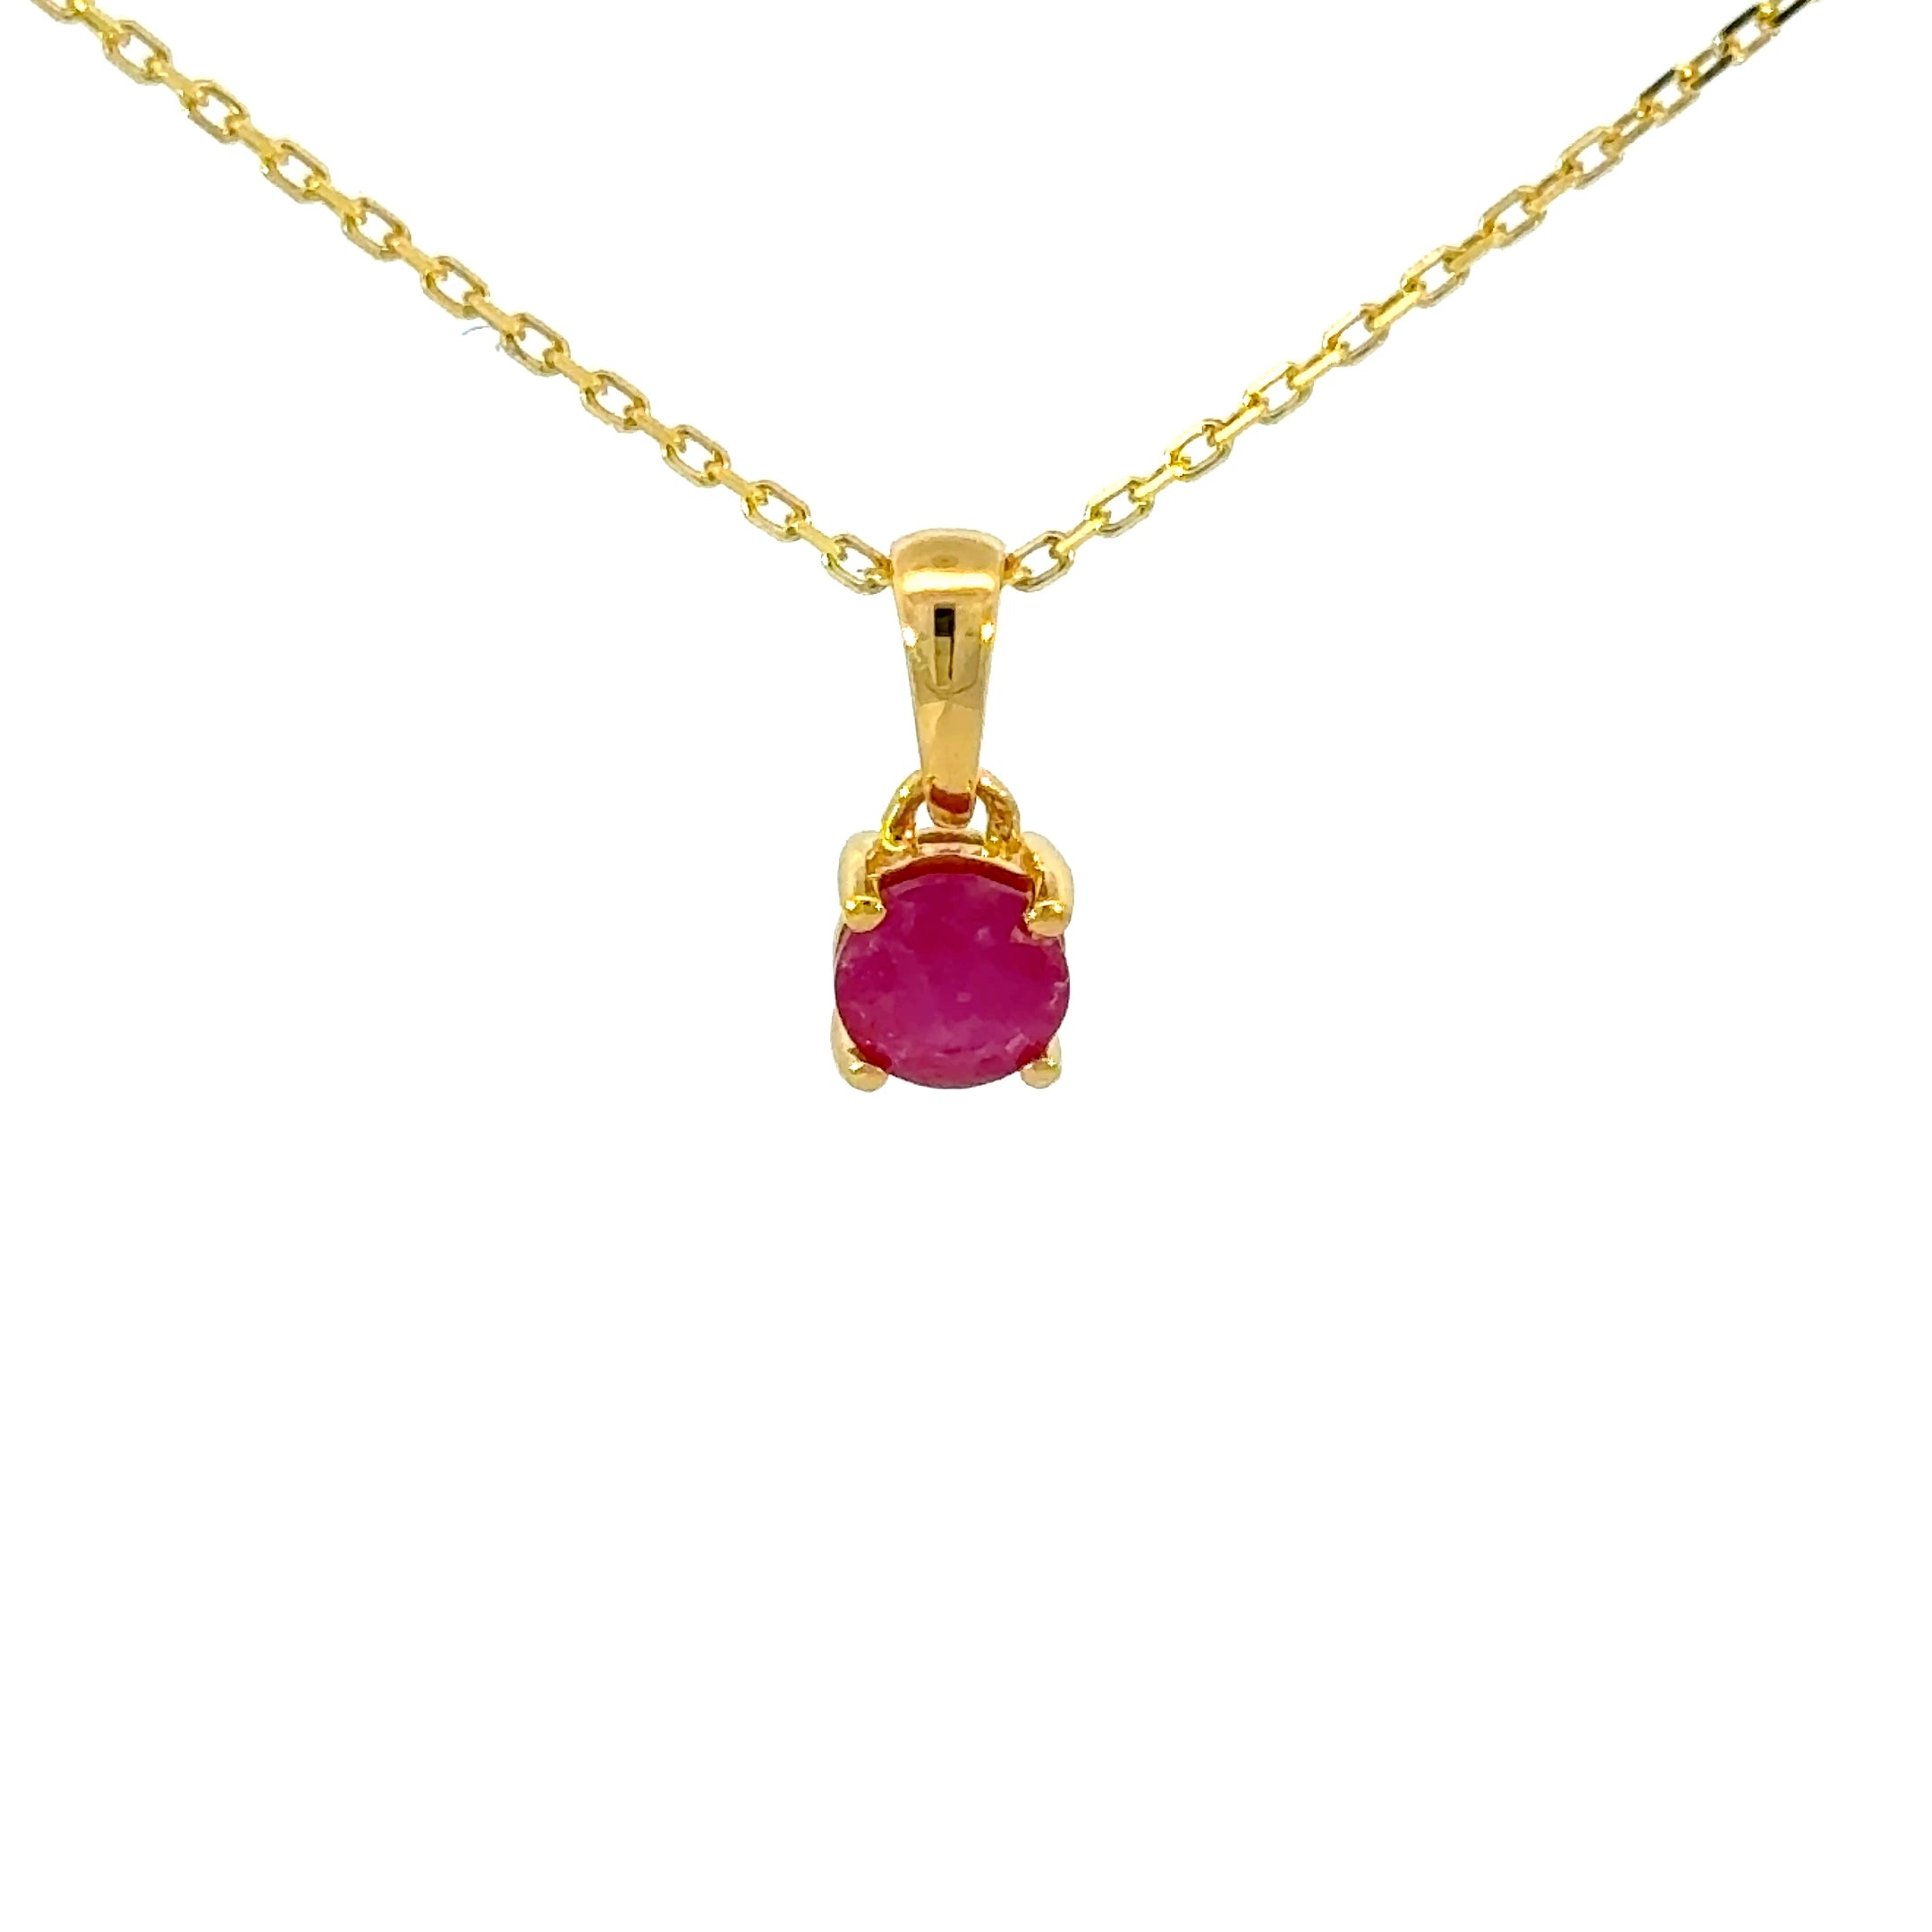 Round Cut Ruby Pendant Necklace in Vermeil